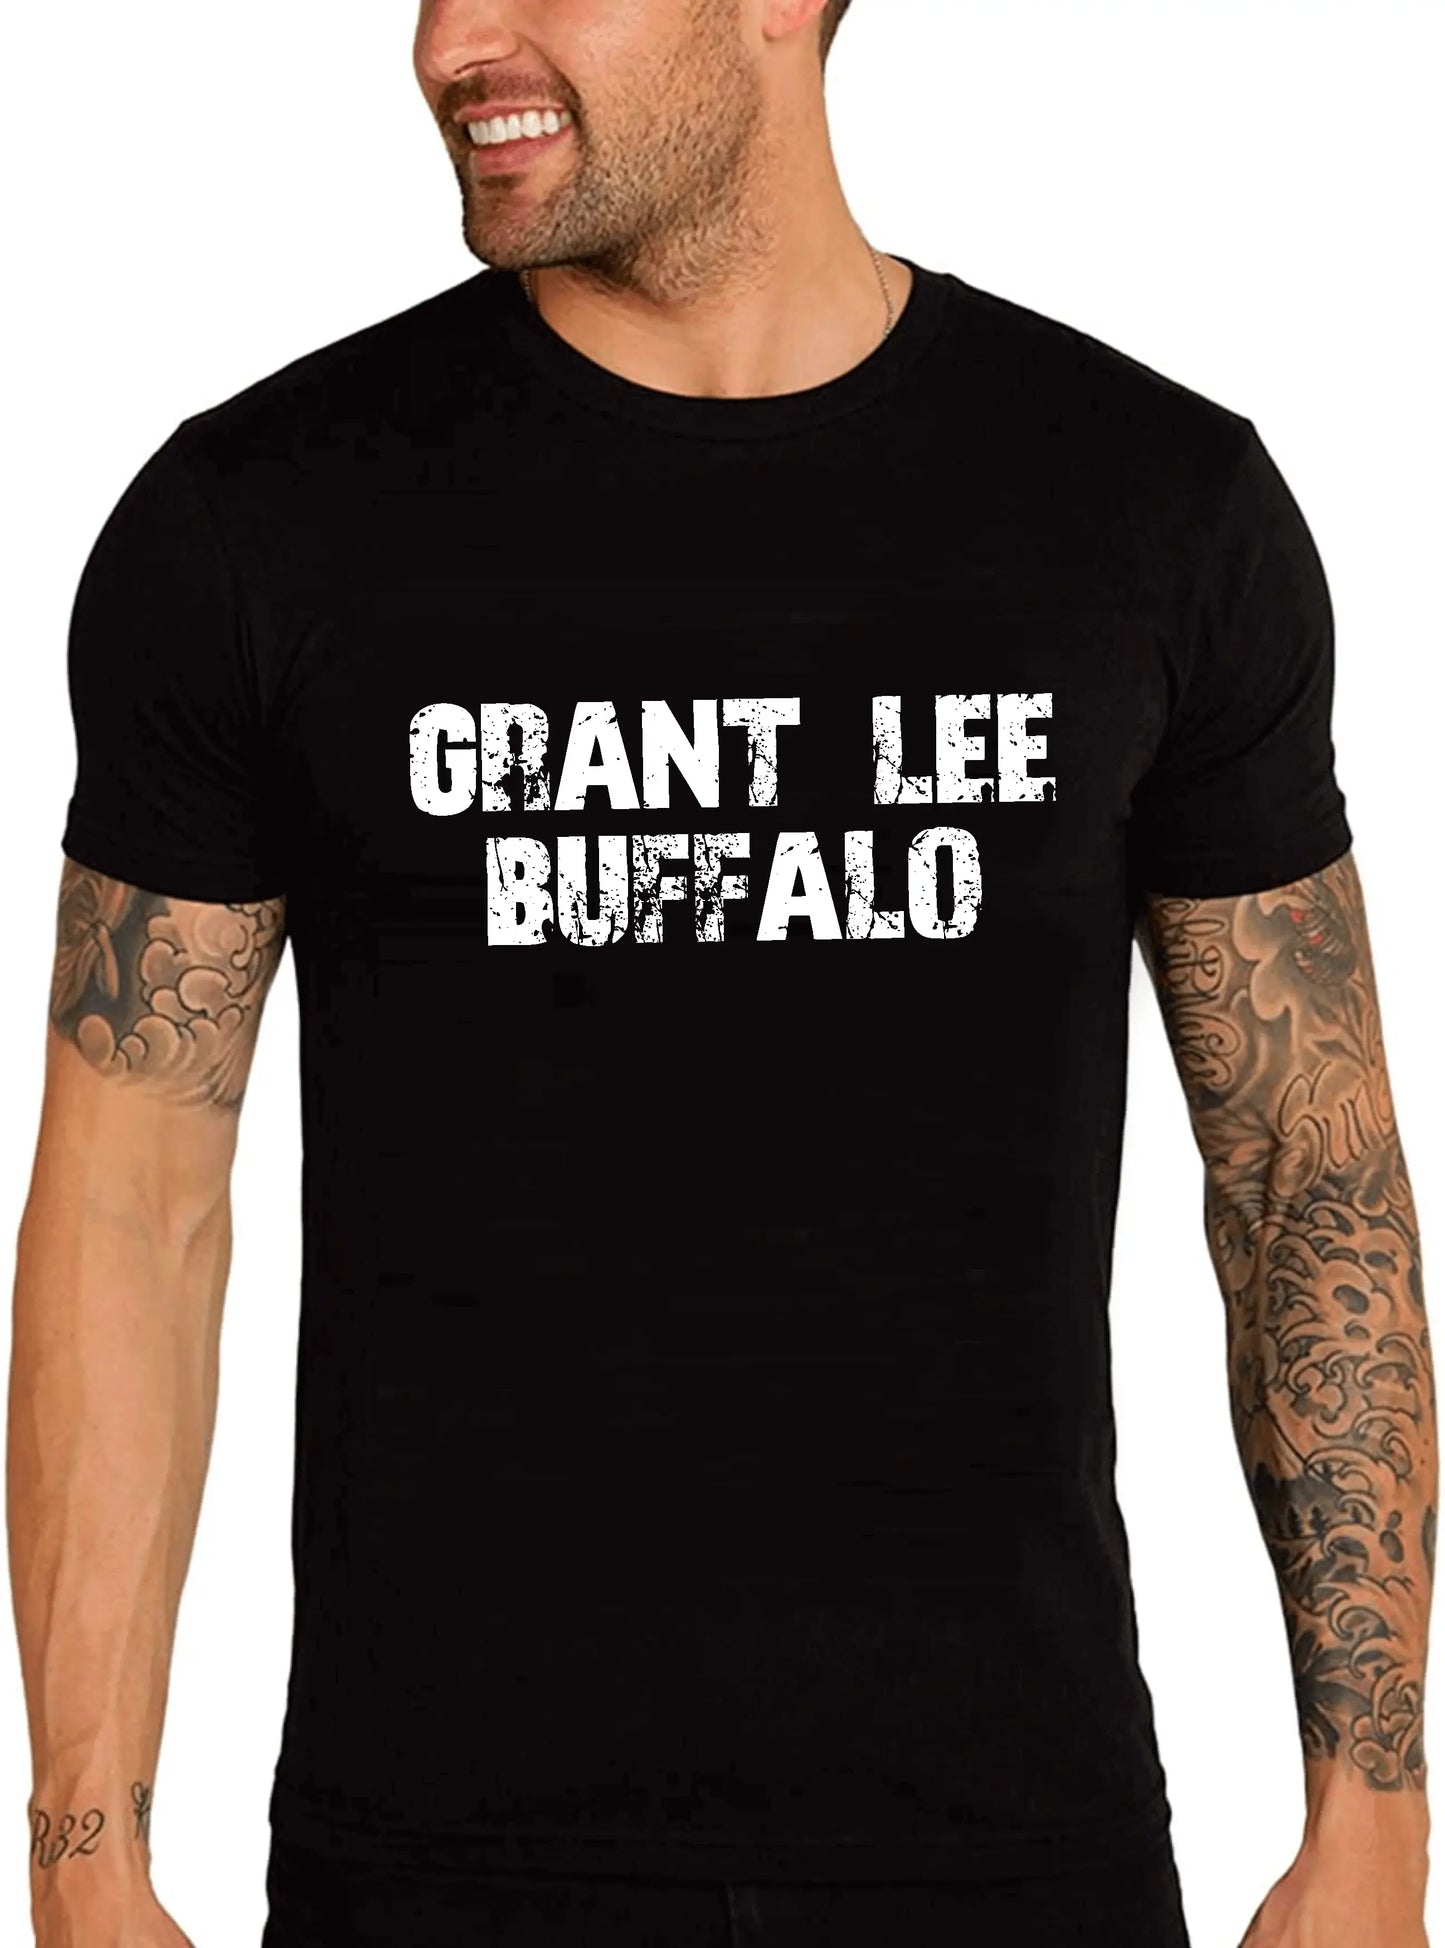 Men's Graphic T-Shirt Grant Lee Buffalo Eco-Friendly Limited Edition Short Sleeve Tee-Shirt Vintage Birthday Gift Novelty